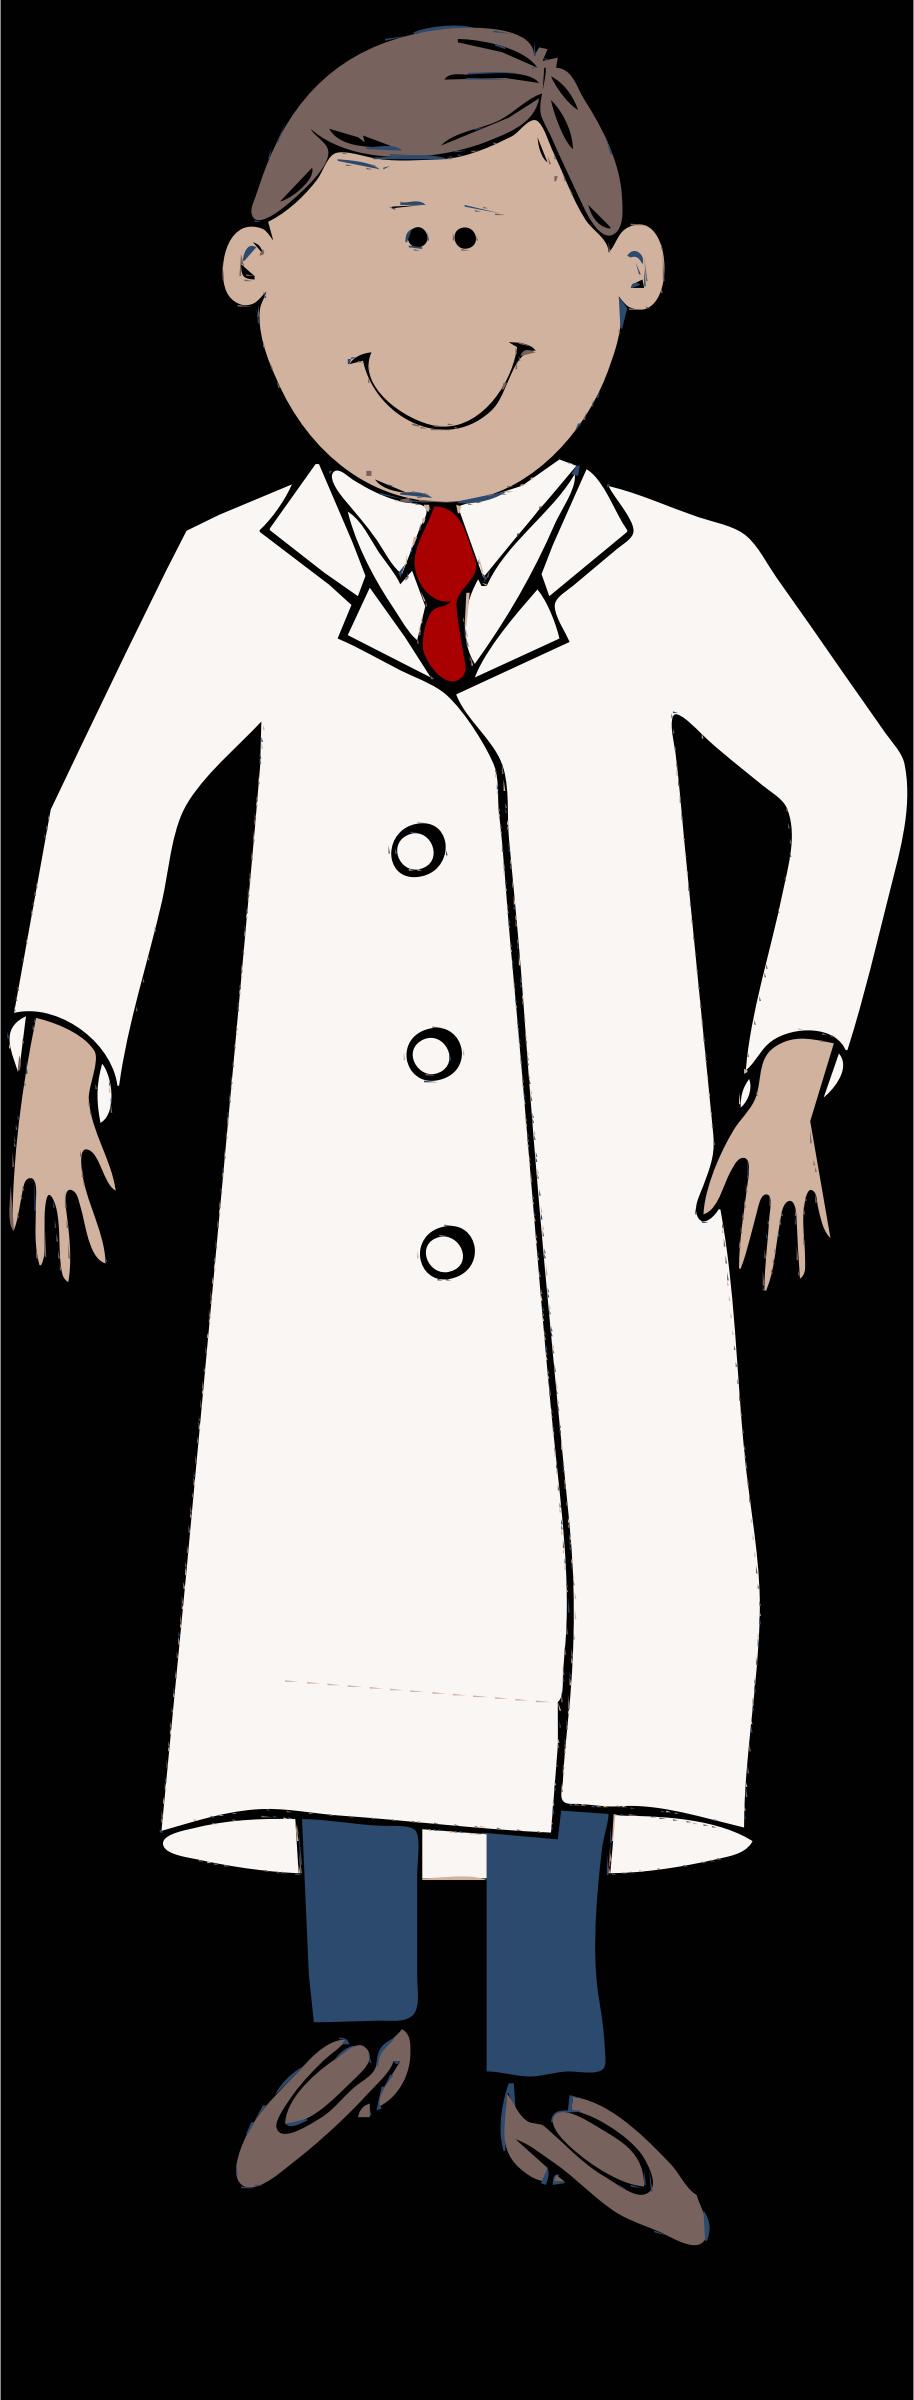 lab coat worn by scientist with red tie png